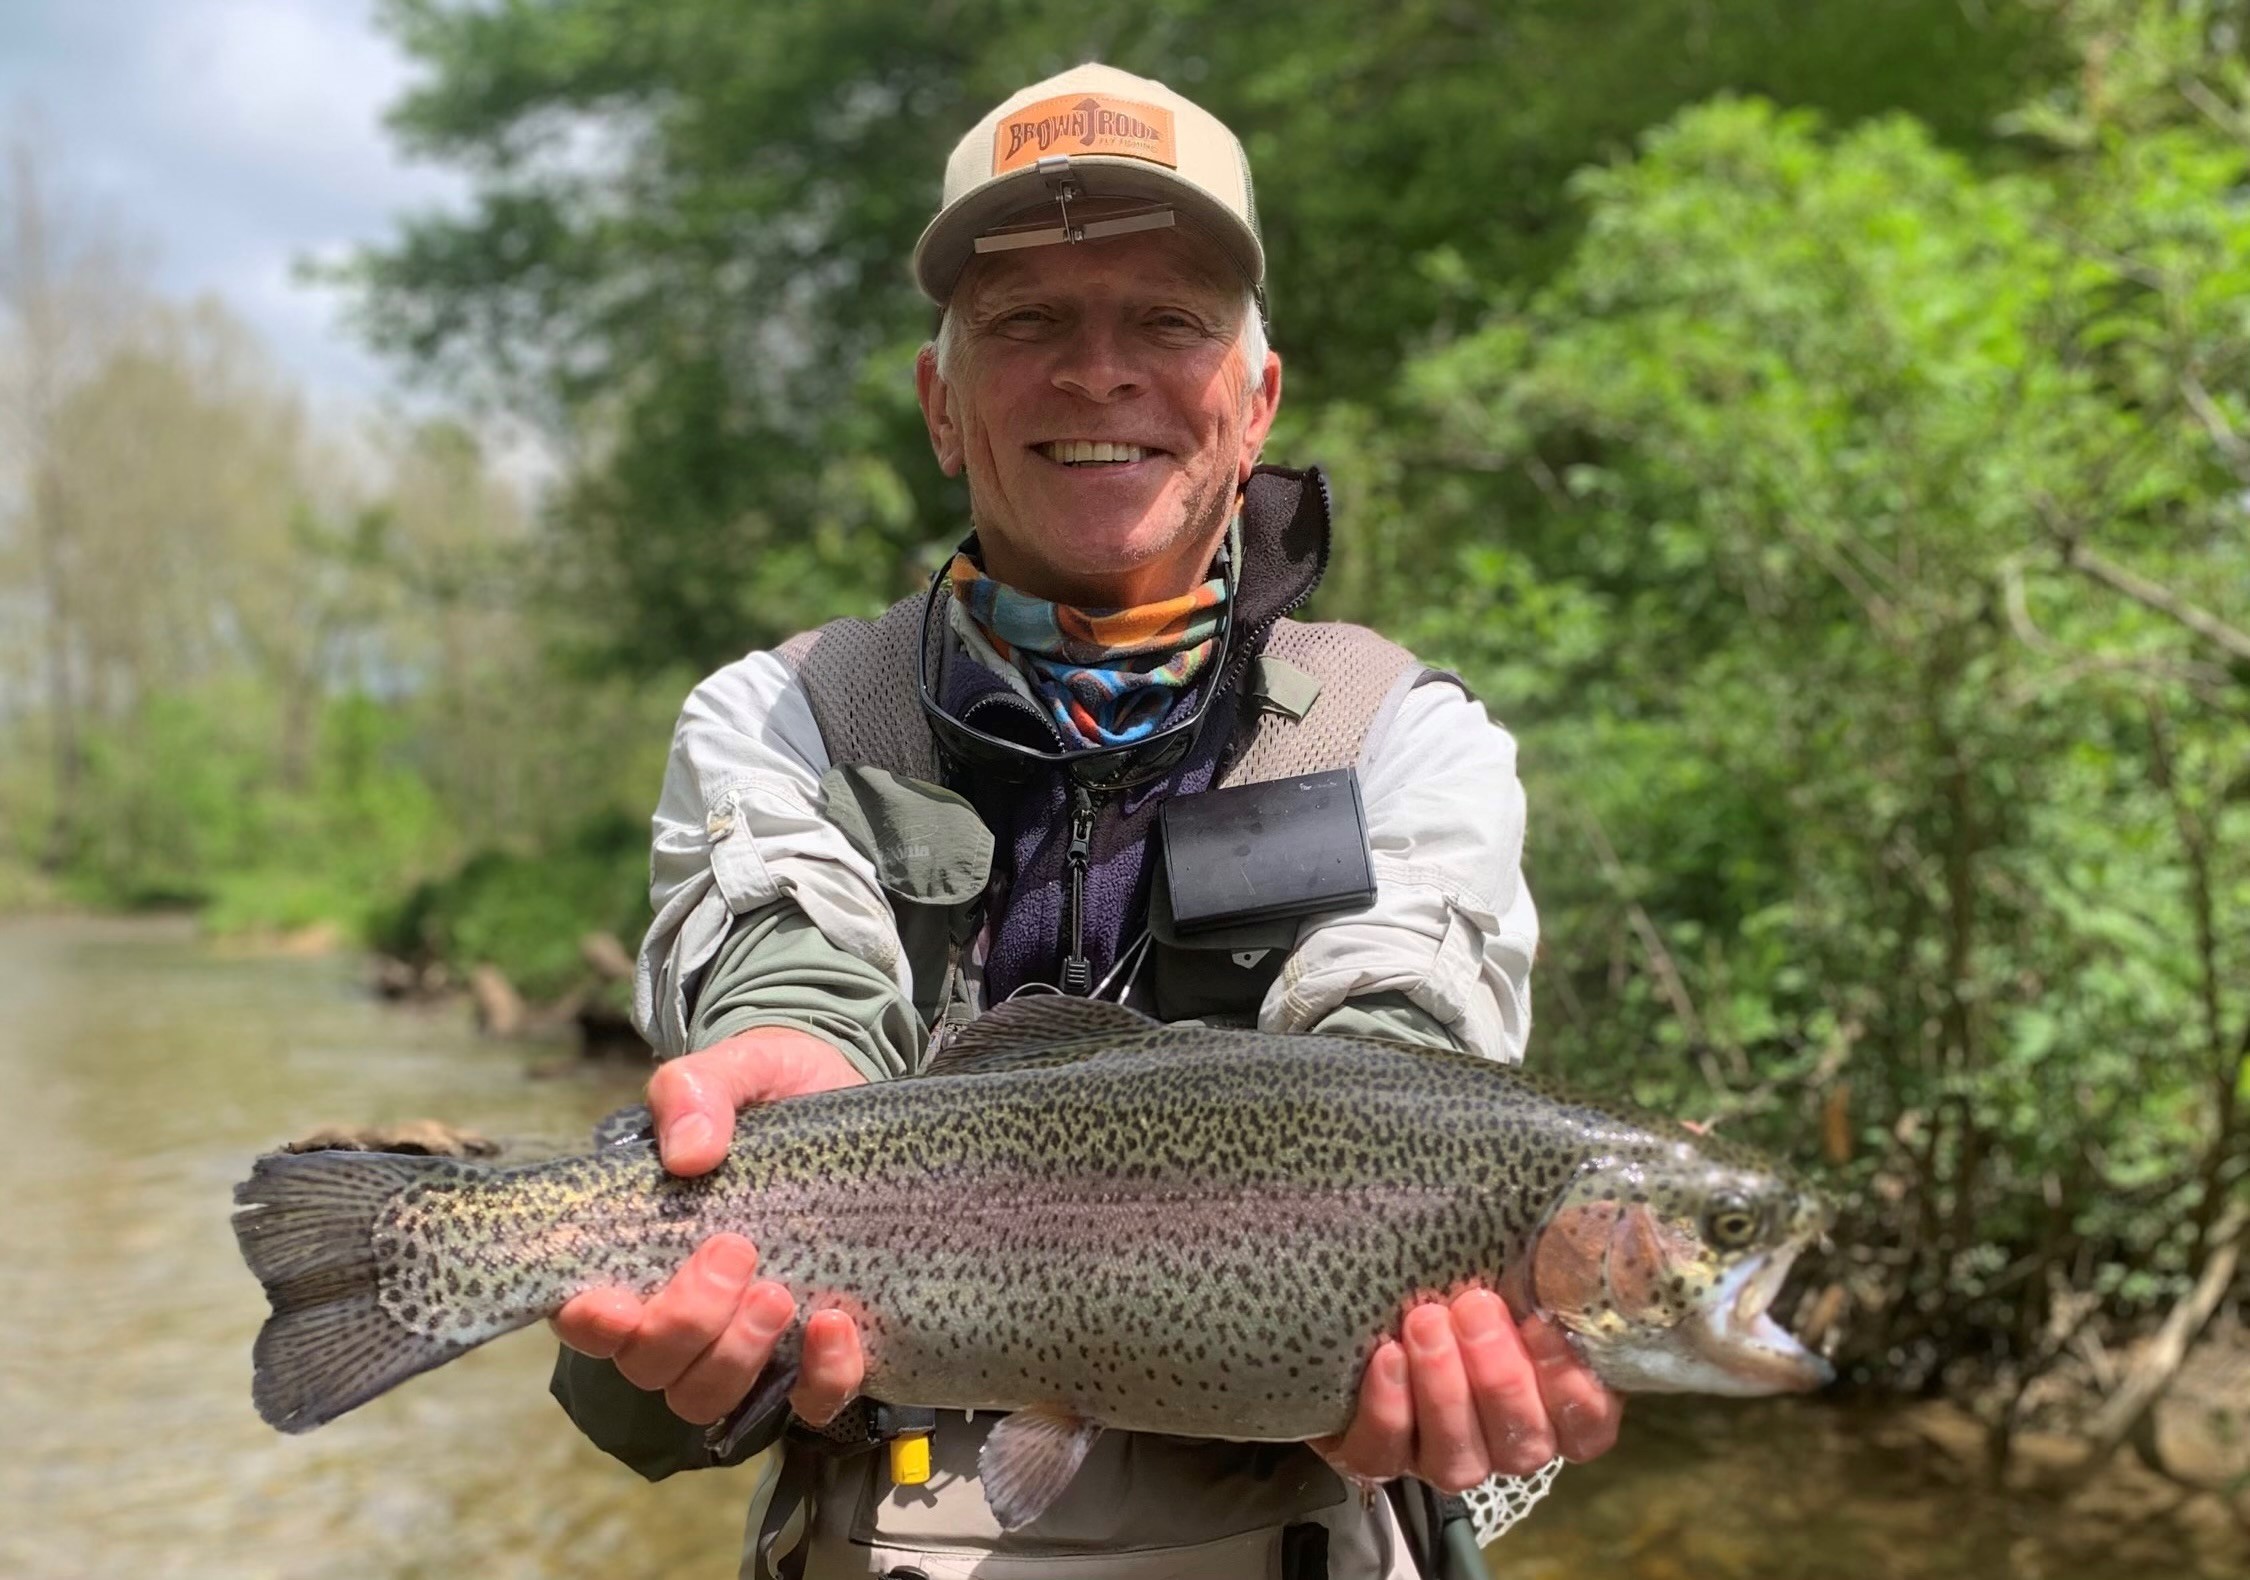 Where are the best trout fishing waters in Pennsylvania